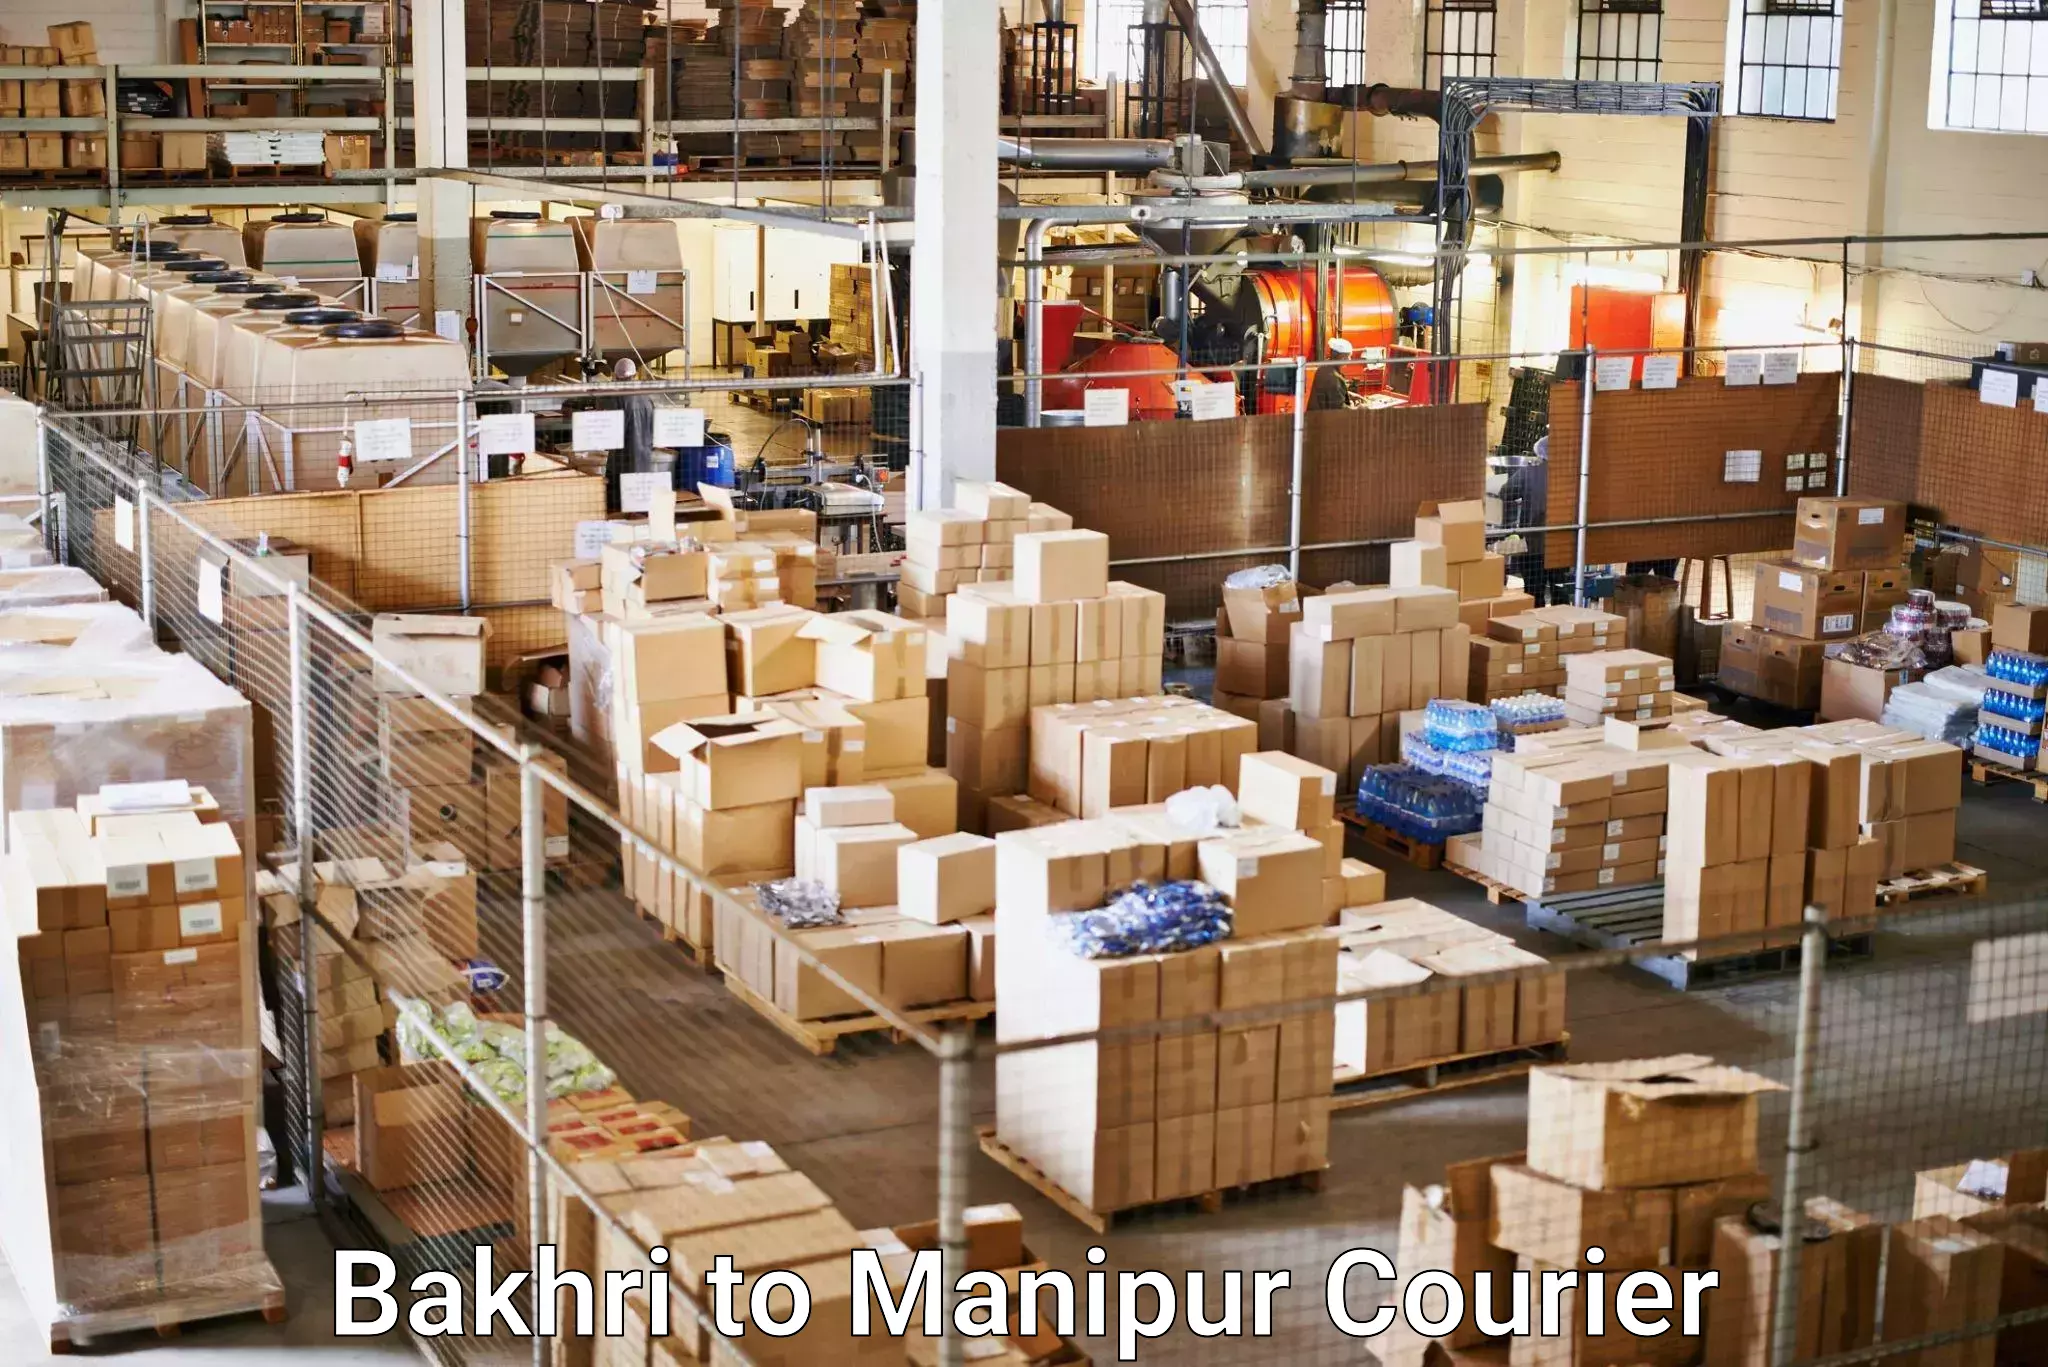 Affordable international shipping in Bakhri to Manipur